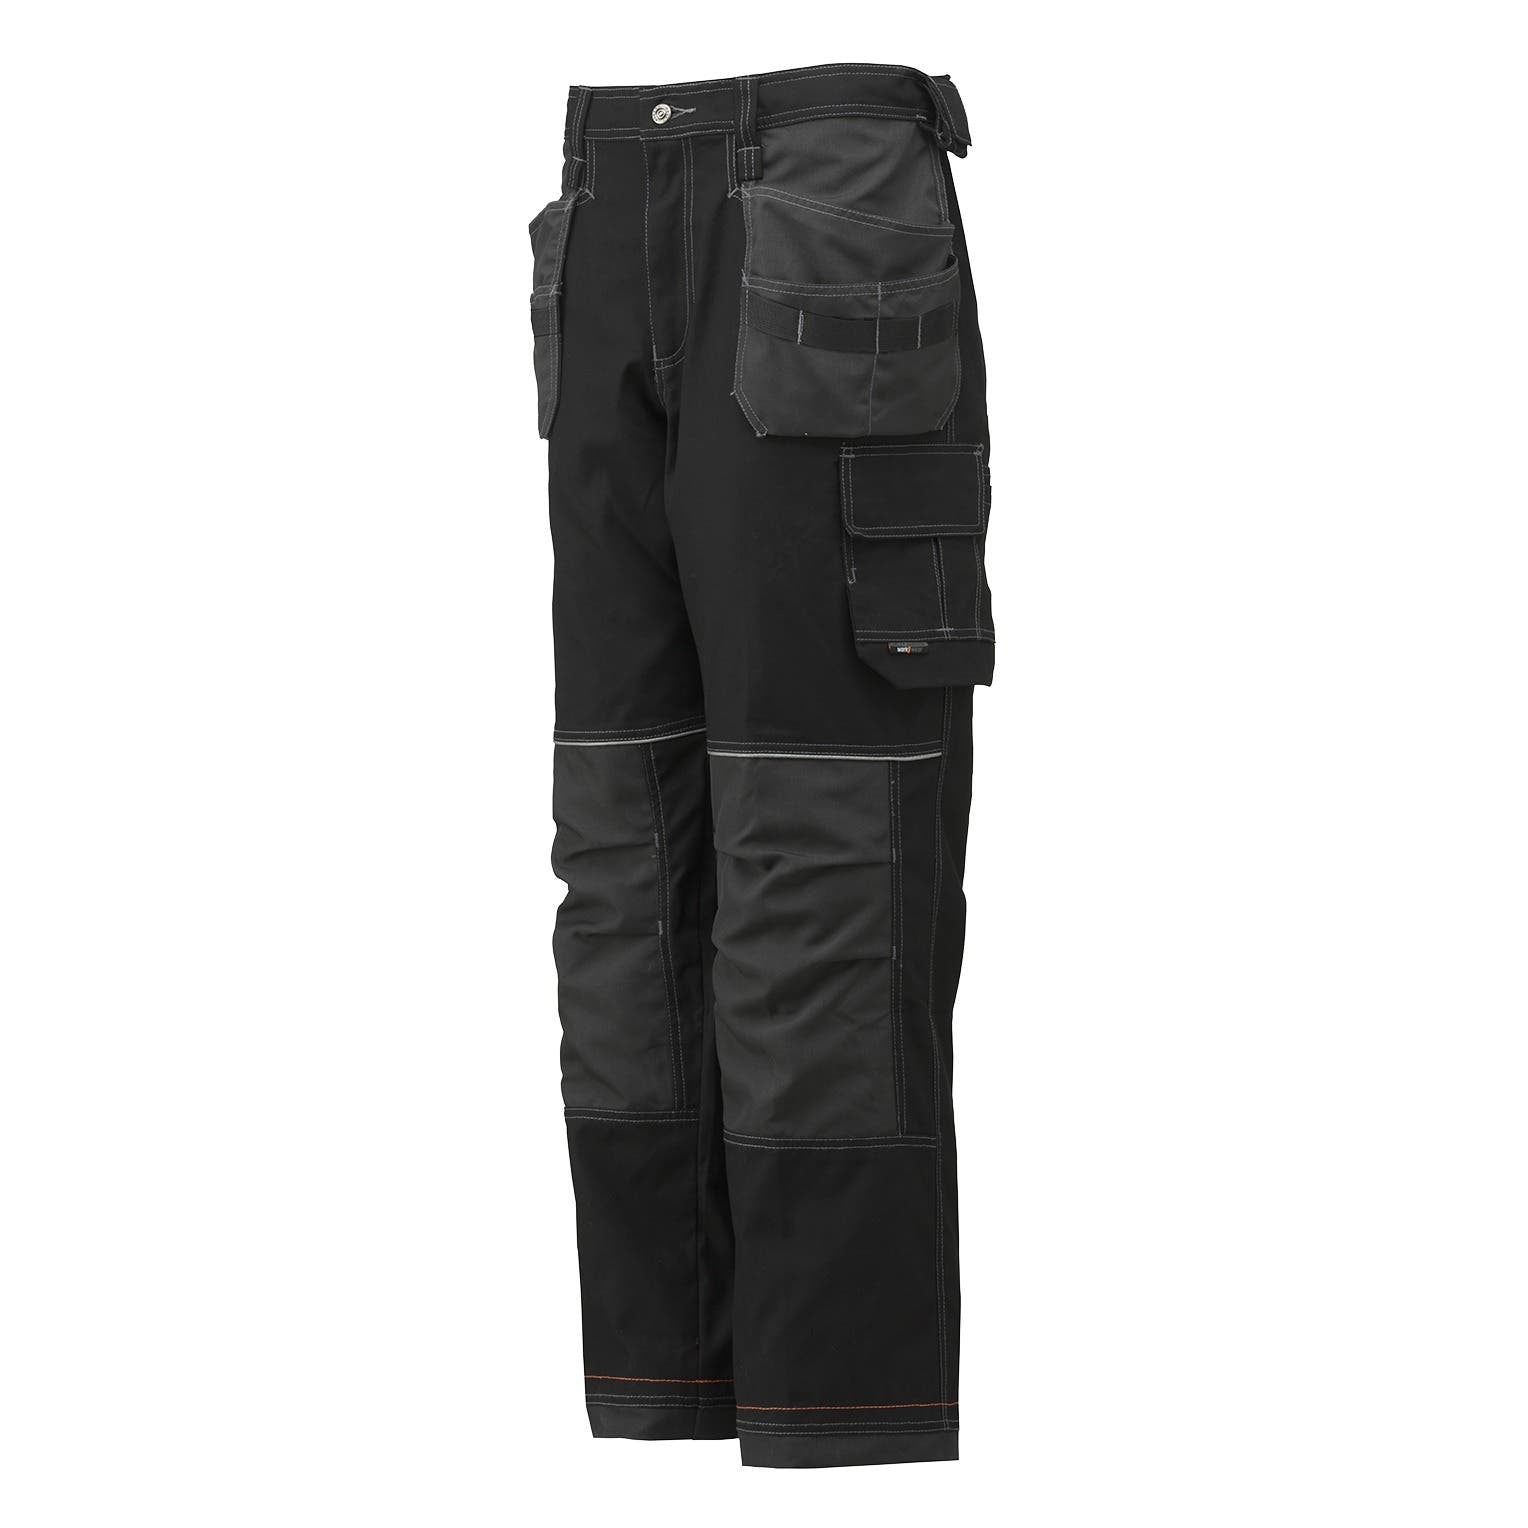 Helly Hansen Men's Chelsea Construction Na Pant in Black /Charcoal from the front